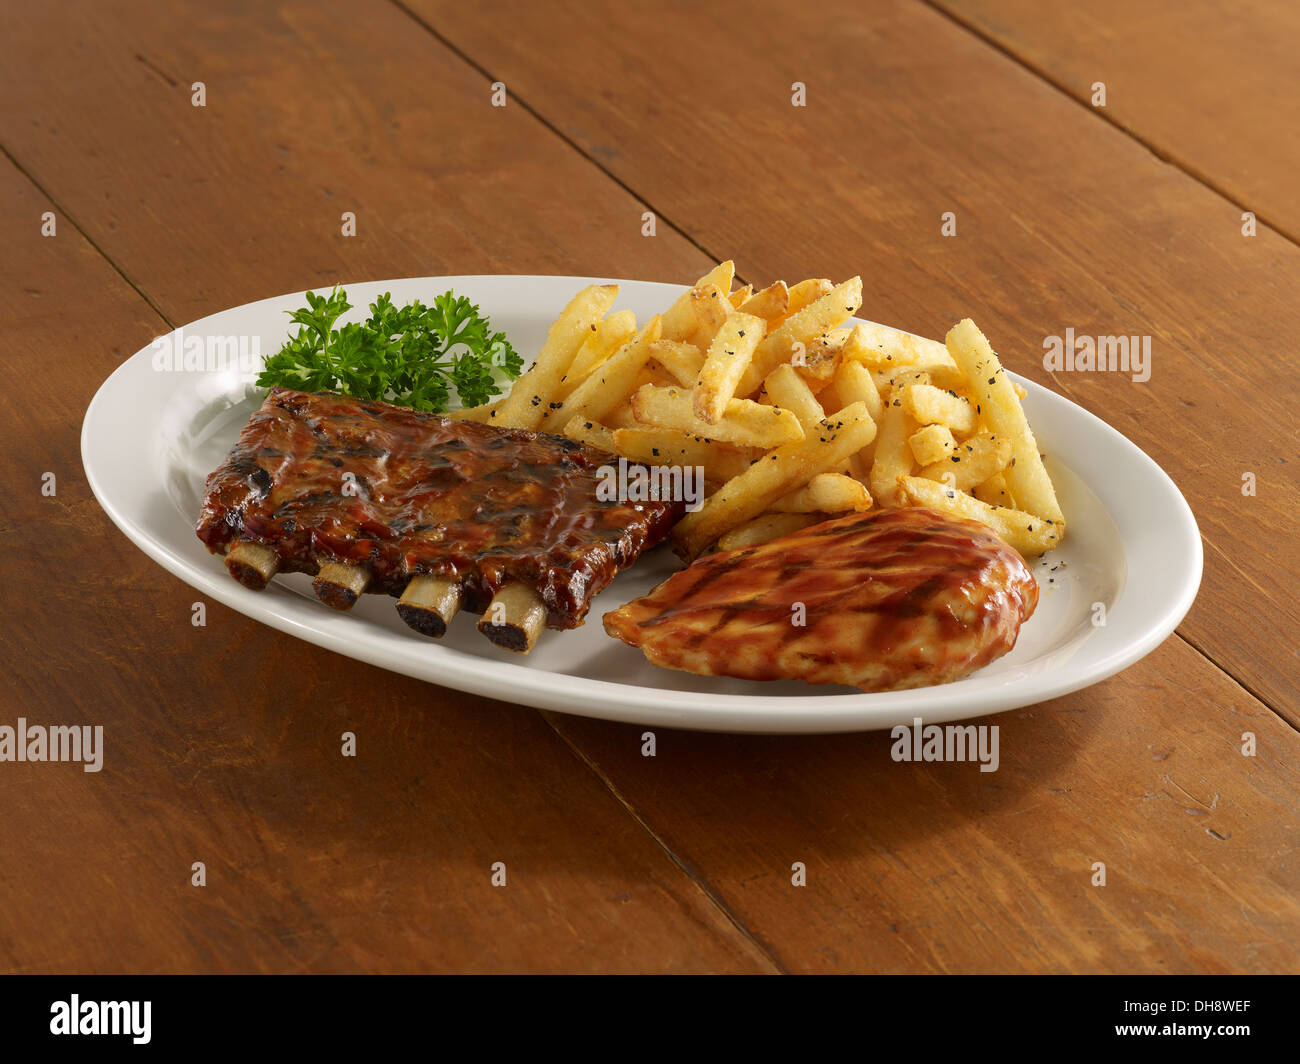 BBQ chicken and ribs with fries Stock Photo